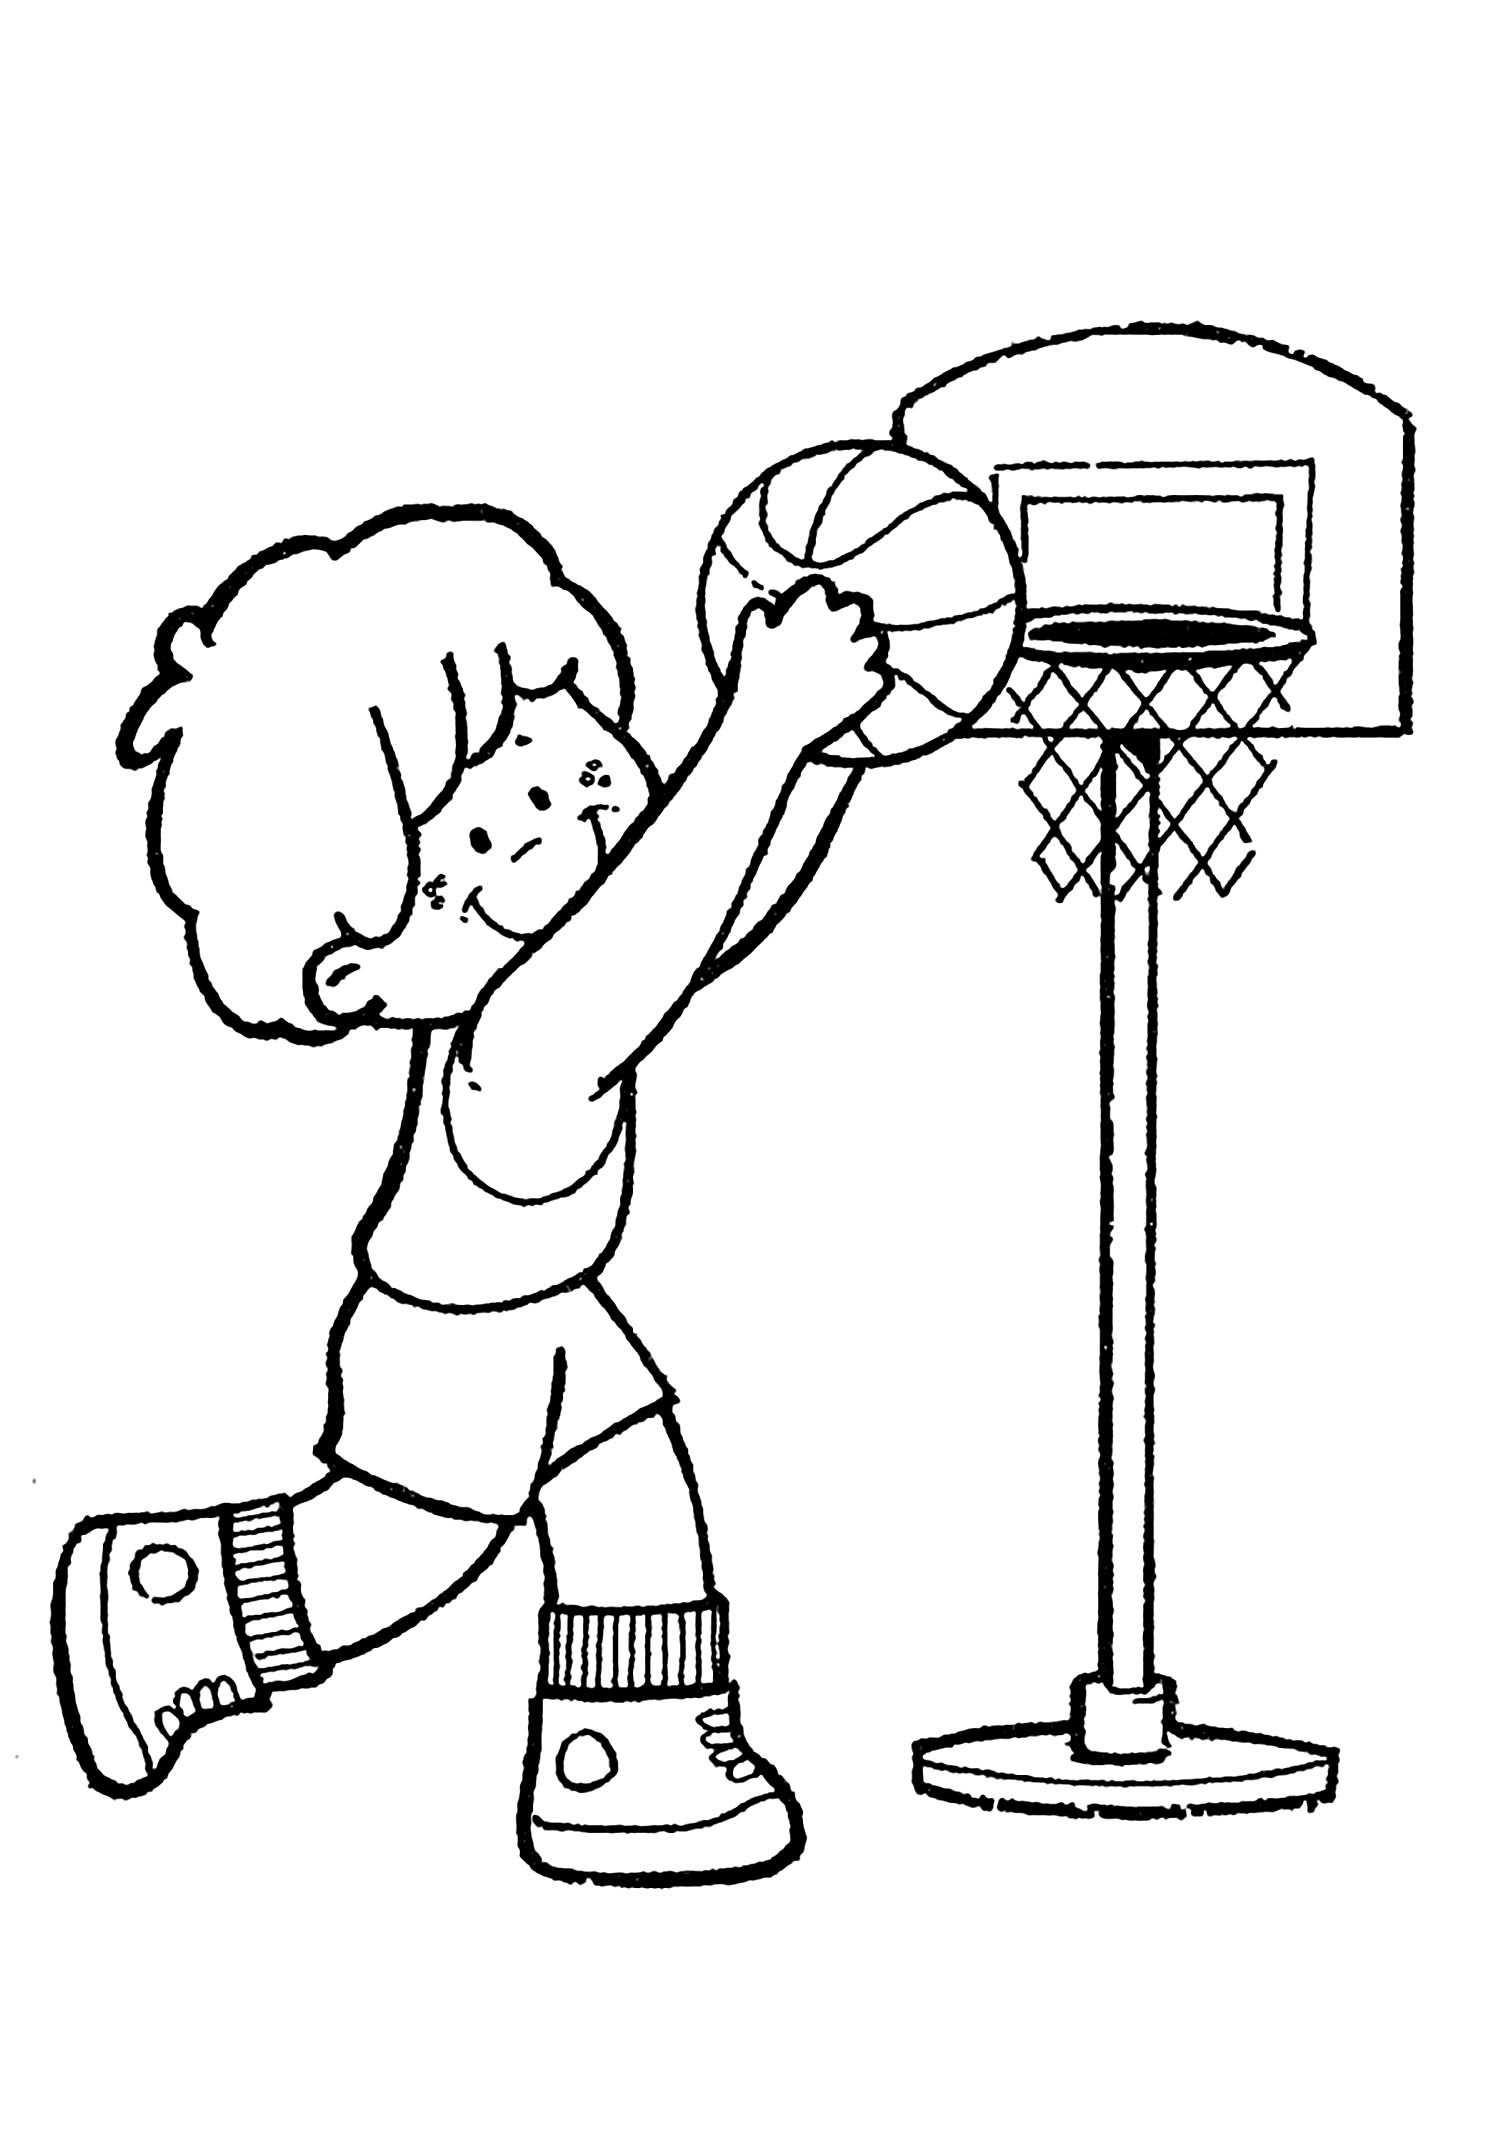 Printable basketball coloring pages for kids - Basketball Kids Coloring ...